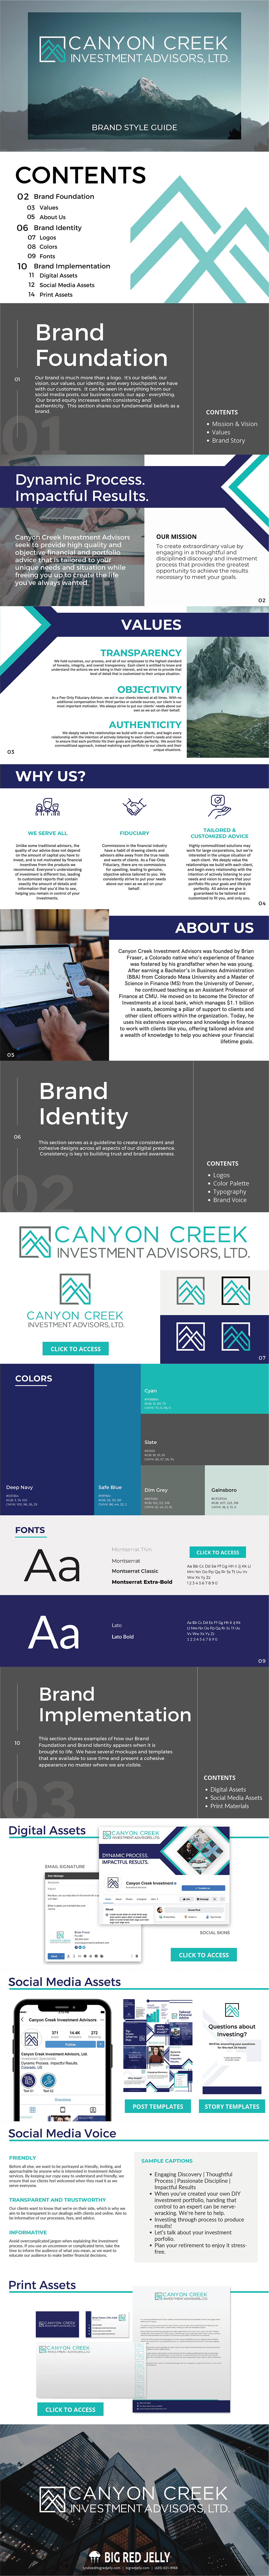 Canyon creek new brand style guide organization - branding project by Big Red Jelly